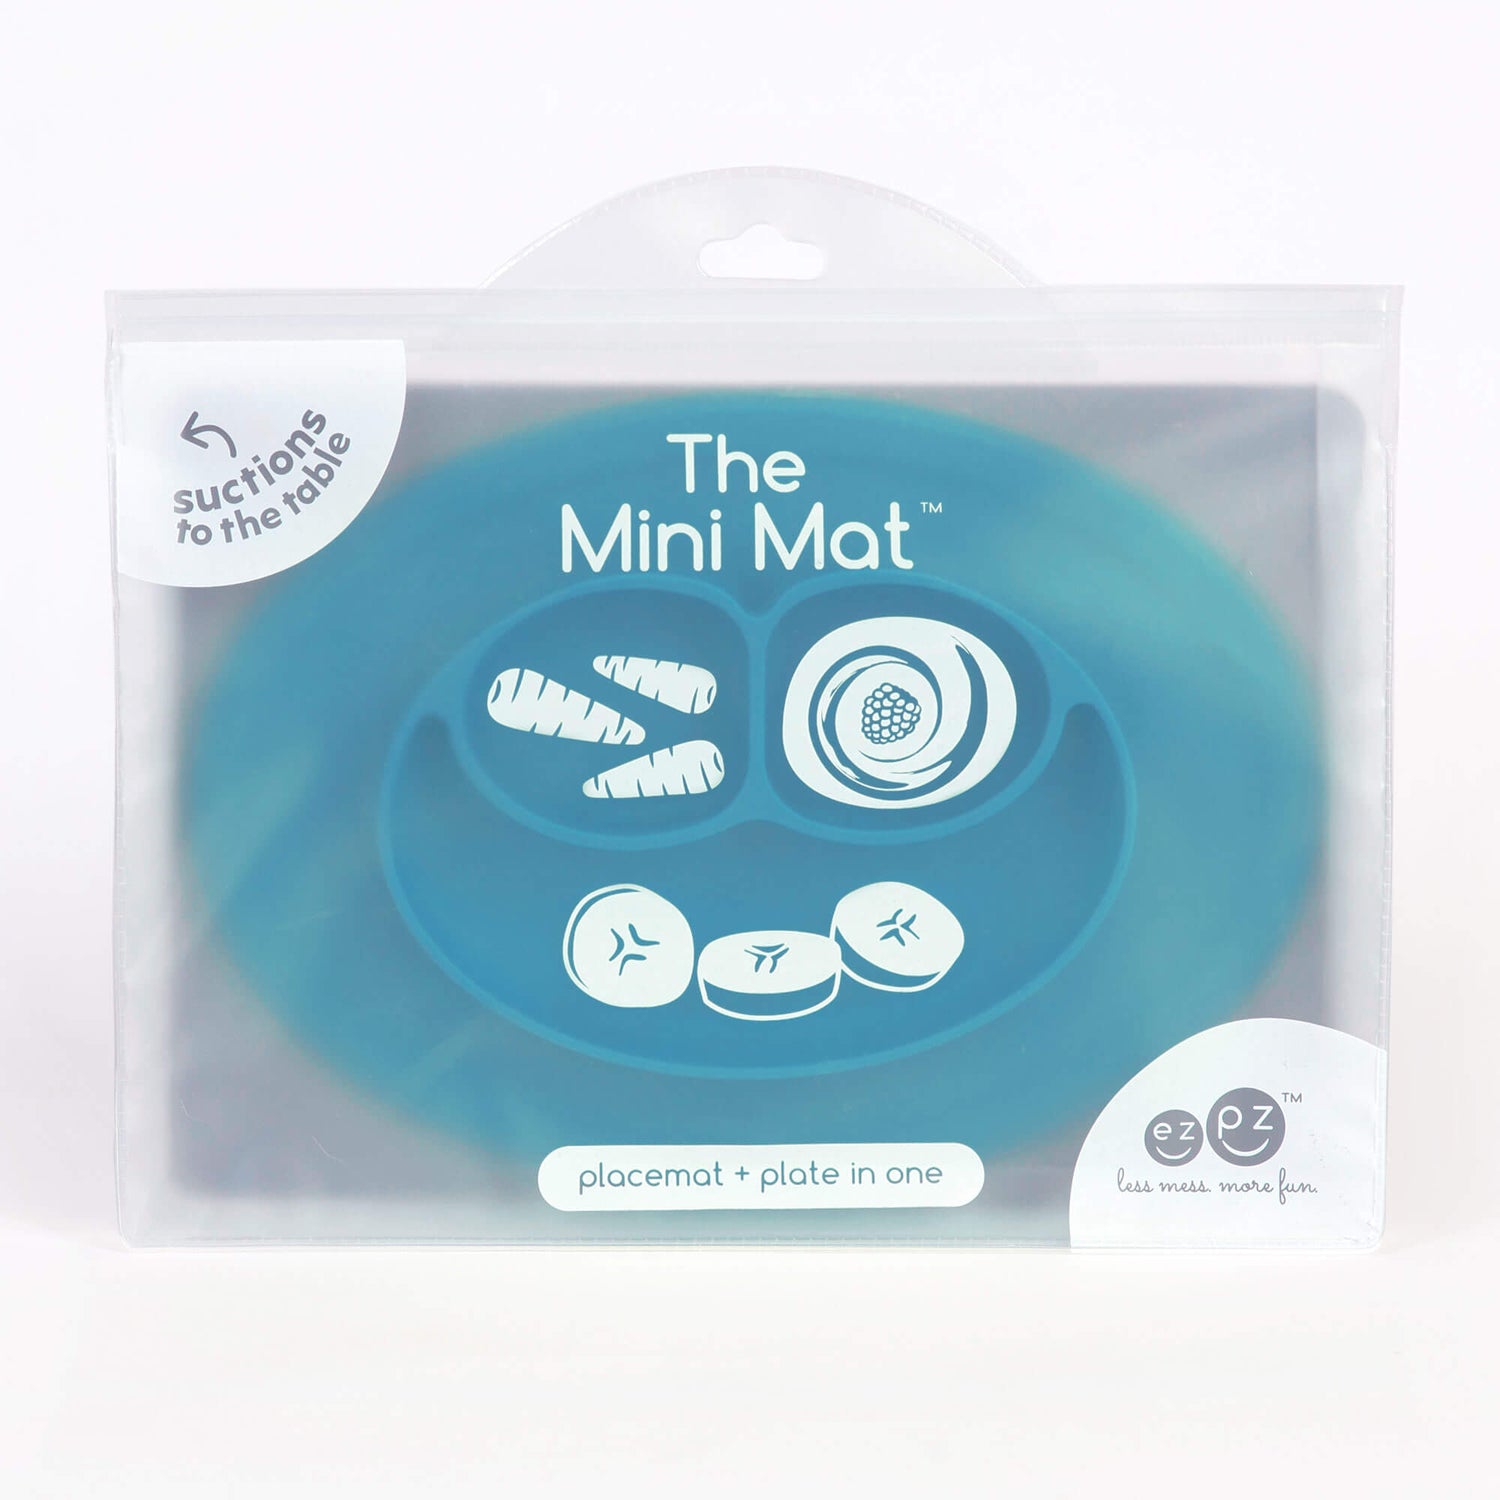 The Mini Mat in Blue by ezpz / Self-Suctioning Silicone Plate + Placemat